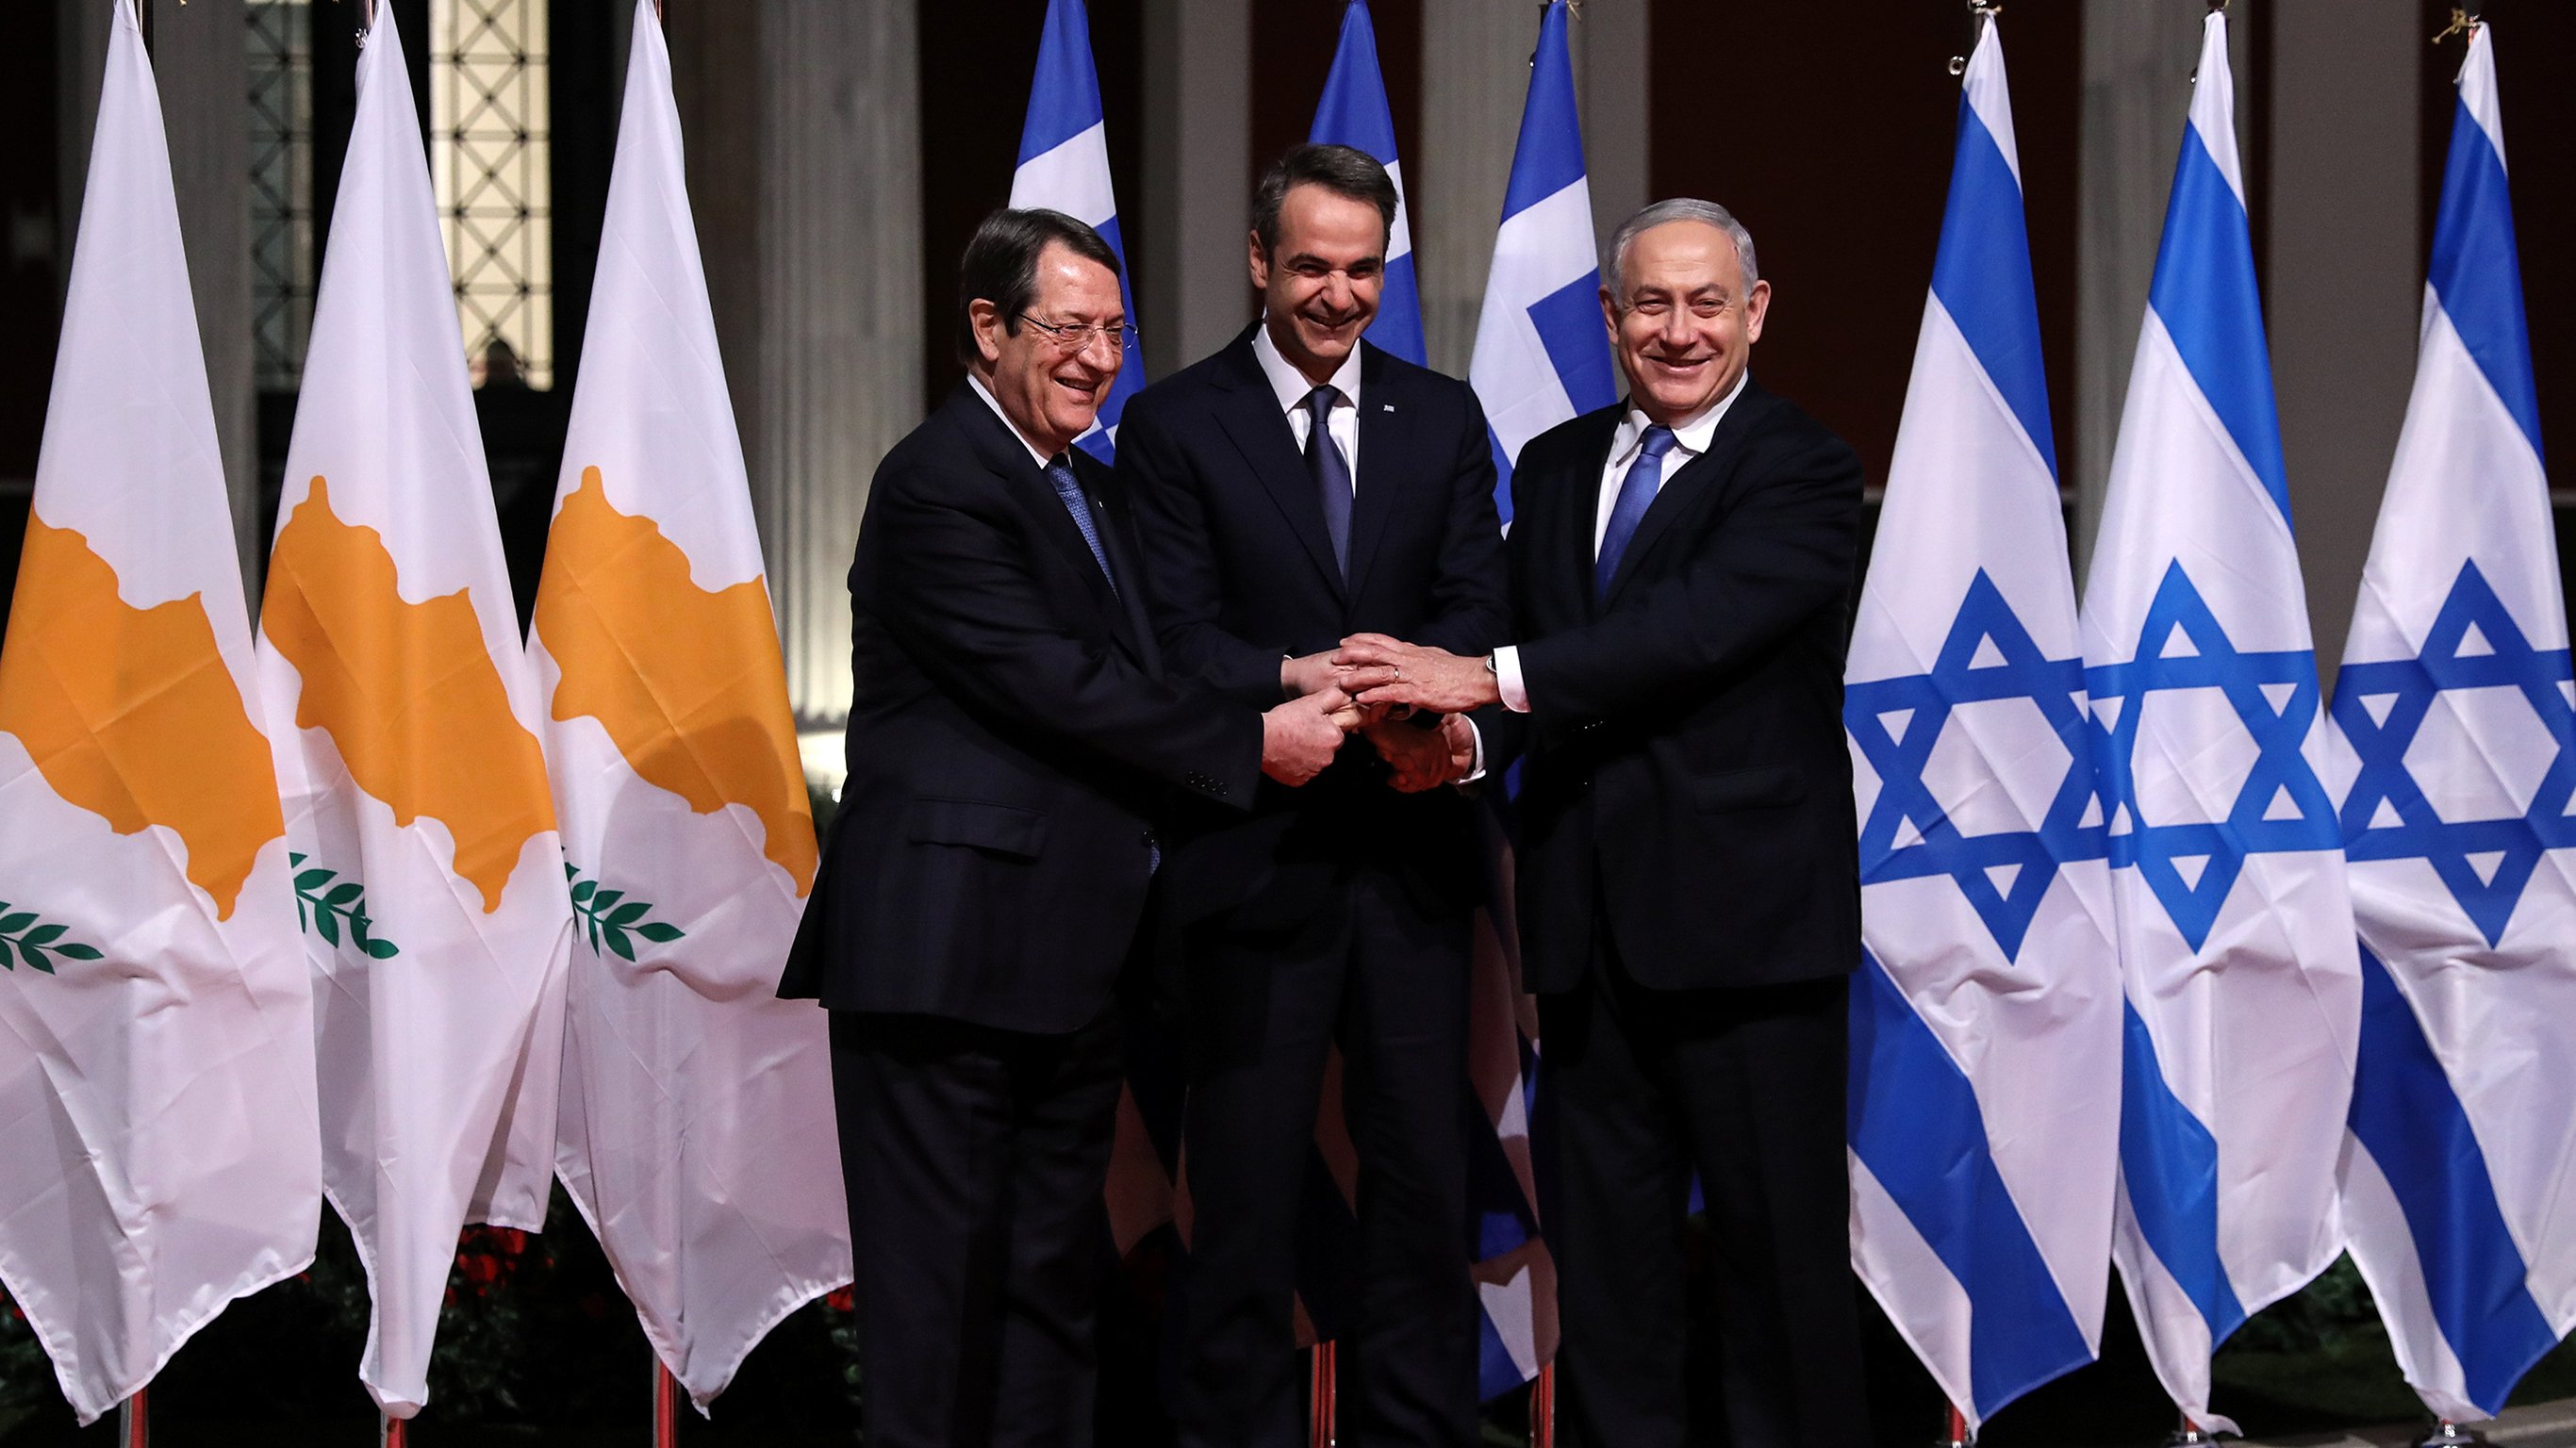 Israel approves deal on EastMed gas pipeline project with Greece, Greek  Cyprus | Daily Sabah